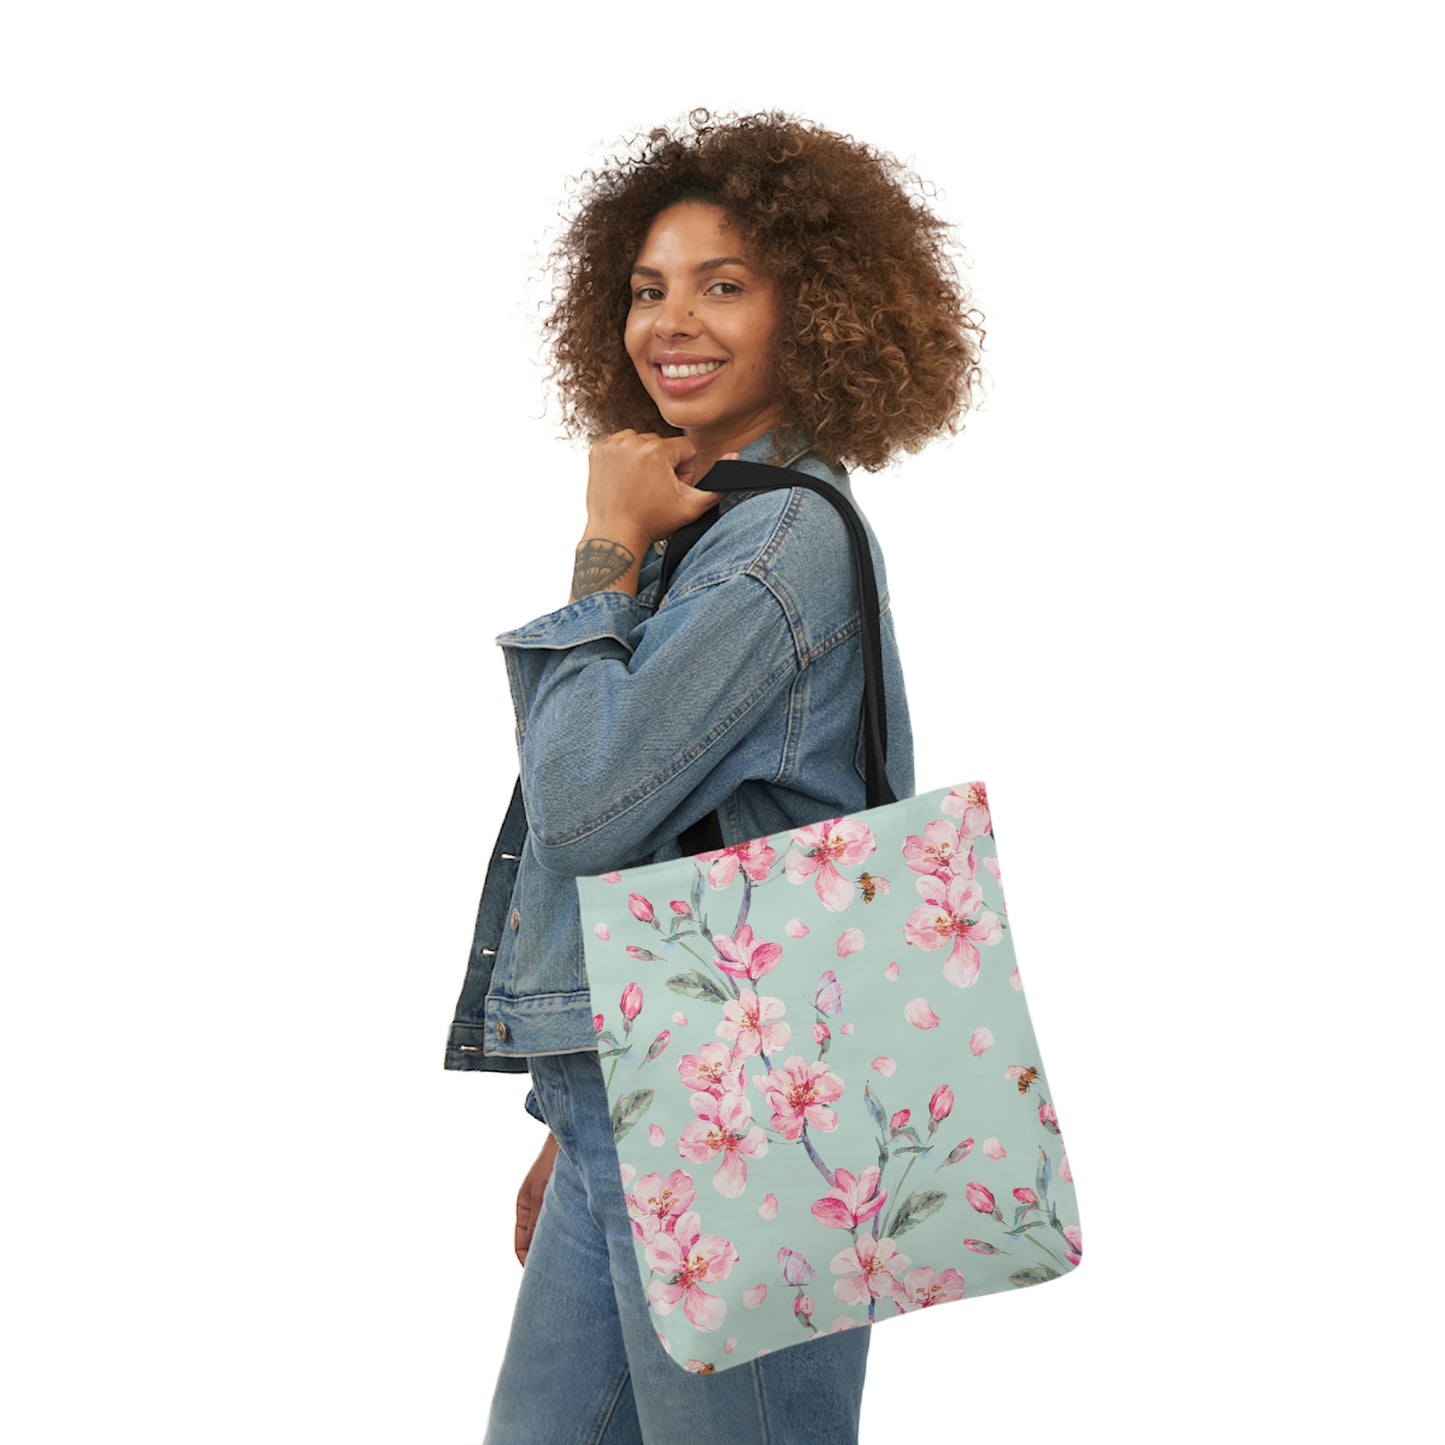 Cherry Blossoms and Honey Bees Polyester Canvas Tote Bag